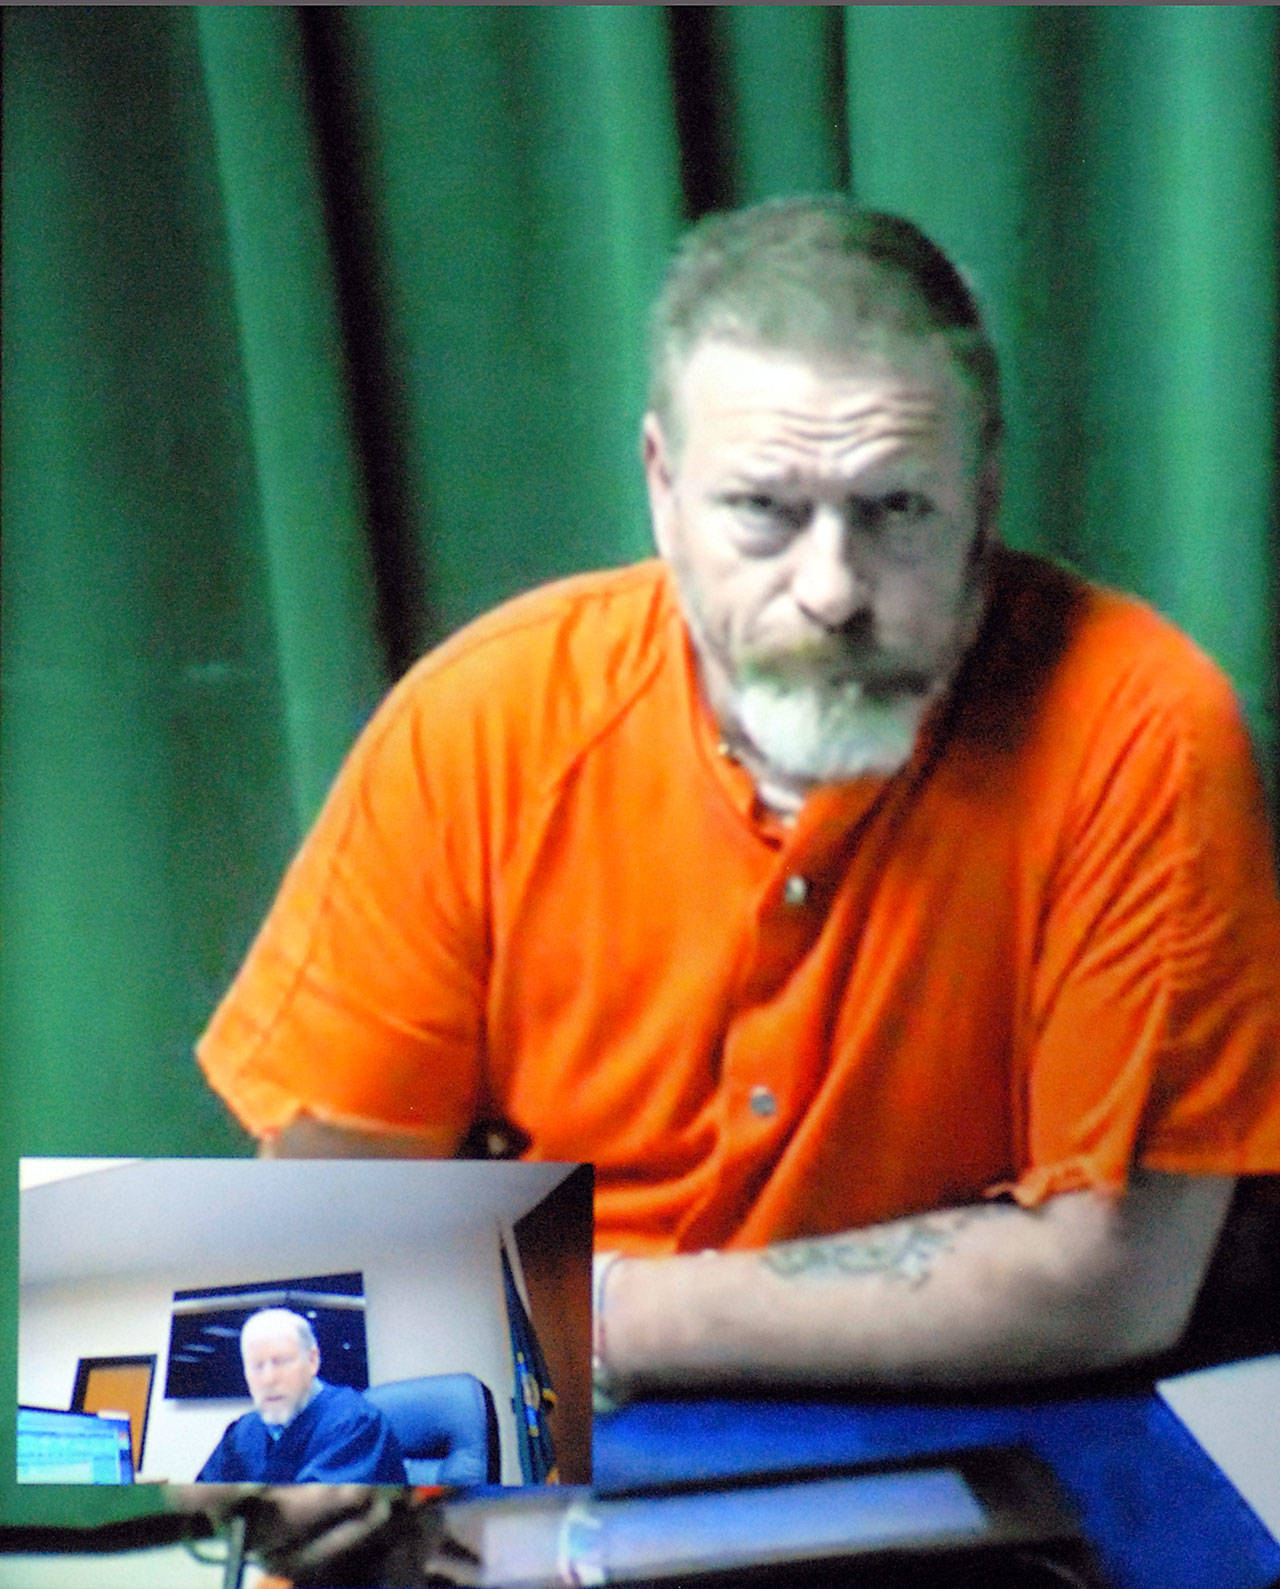 <strong>Keith Thorpe</strong>/Peninsula Daily News
Dennis Bauer makes his first video appearance in Clallam County Superior Court in Port Angeles on Friday after he was arrested Thursday.